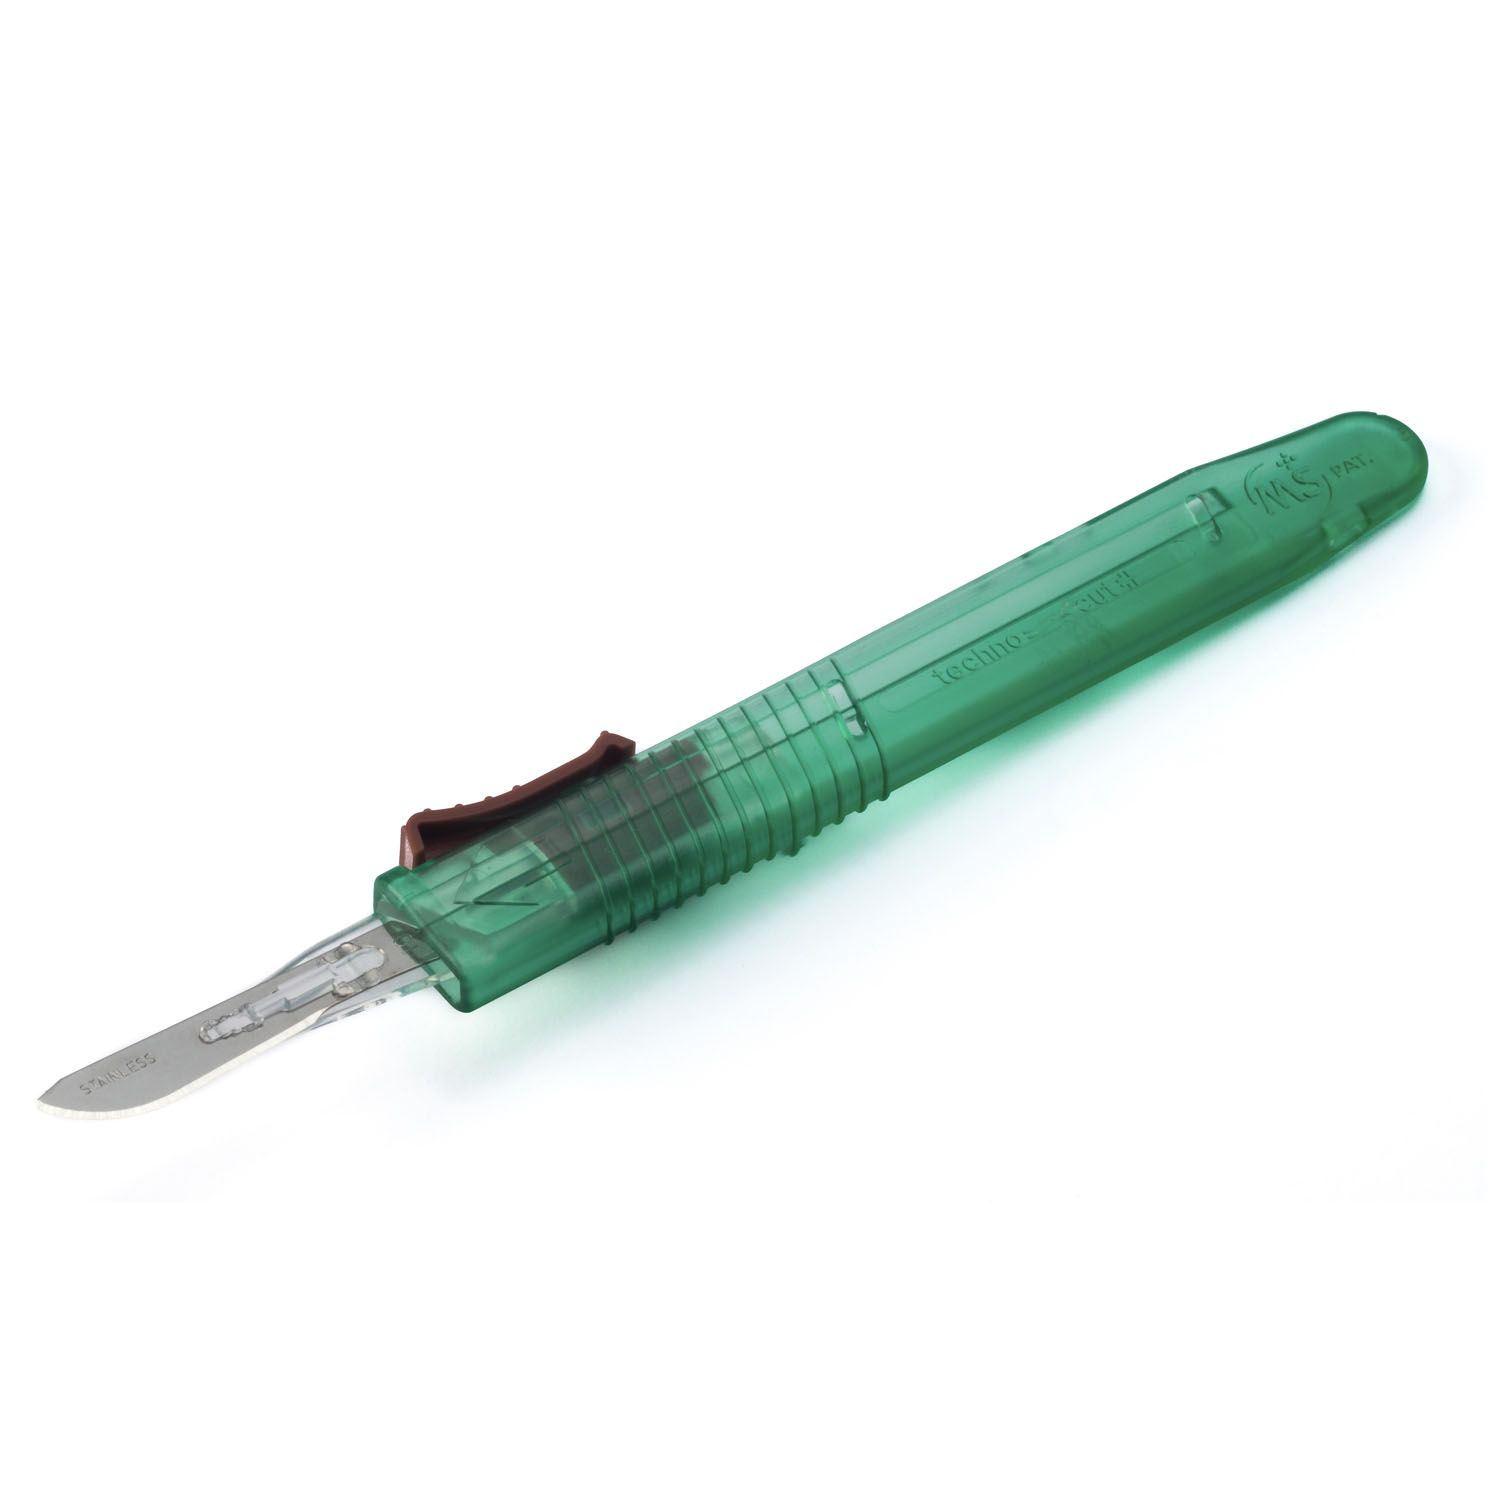 MYCO DISPOSABLE RELI-CUT SAFETY SCALPELS : 6008TR-10 BX $12.50 Stocked